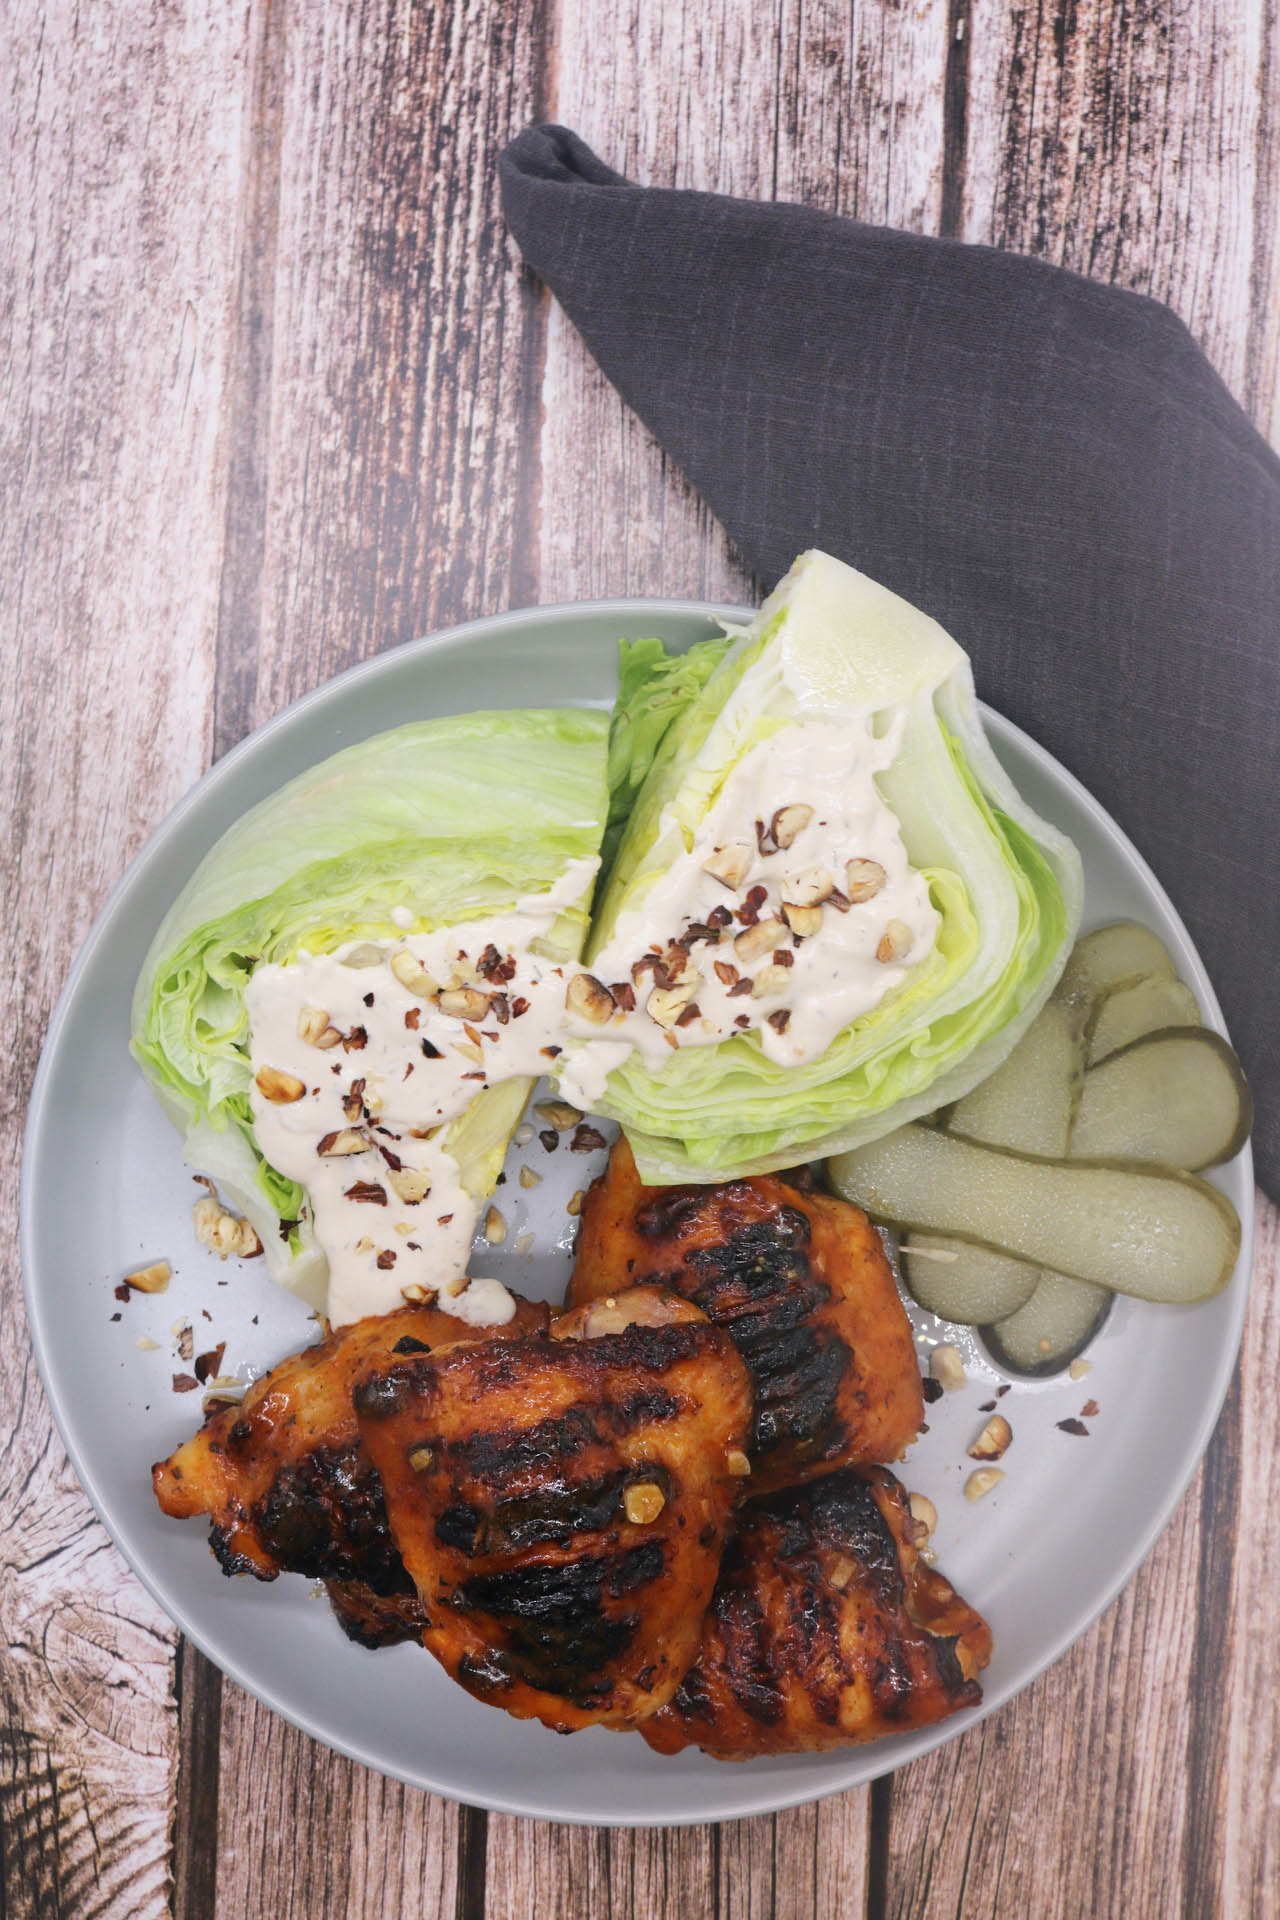 BBQ Buffalo Chicken Thighs with Wedged Ranch Salad, BBQ Buffalo Chicken Thighs with Wedged Ranch Salad